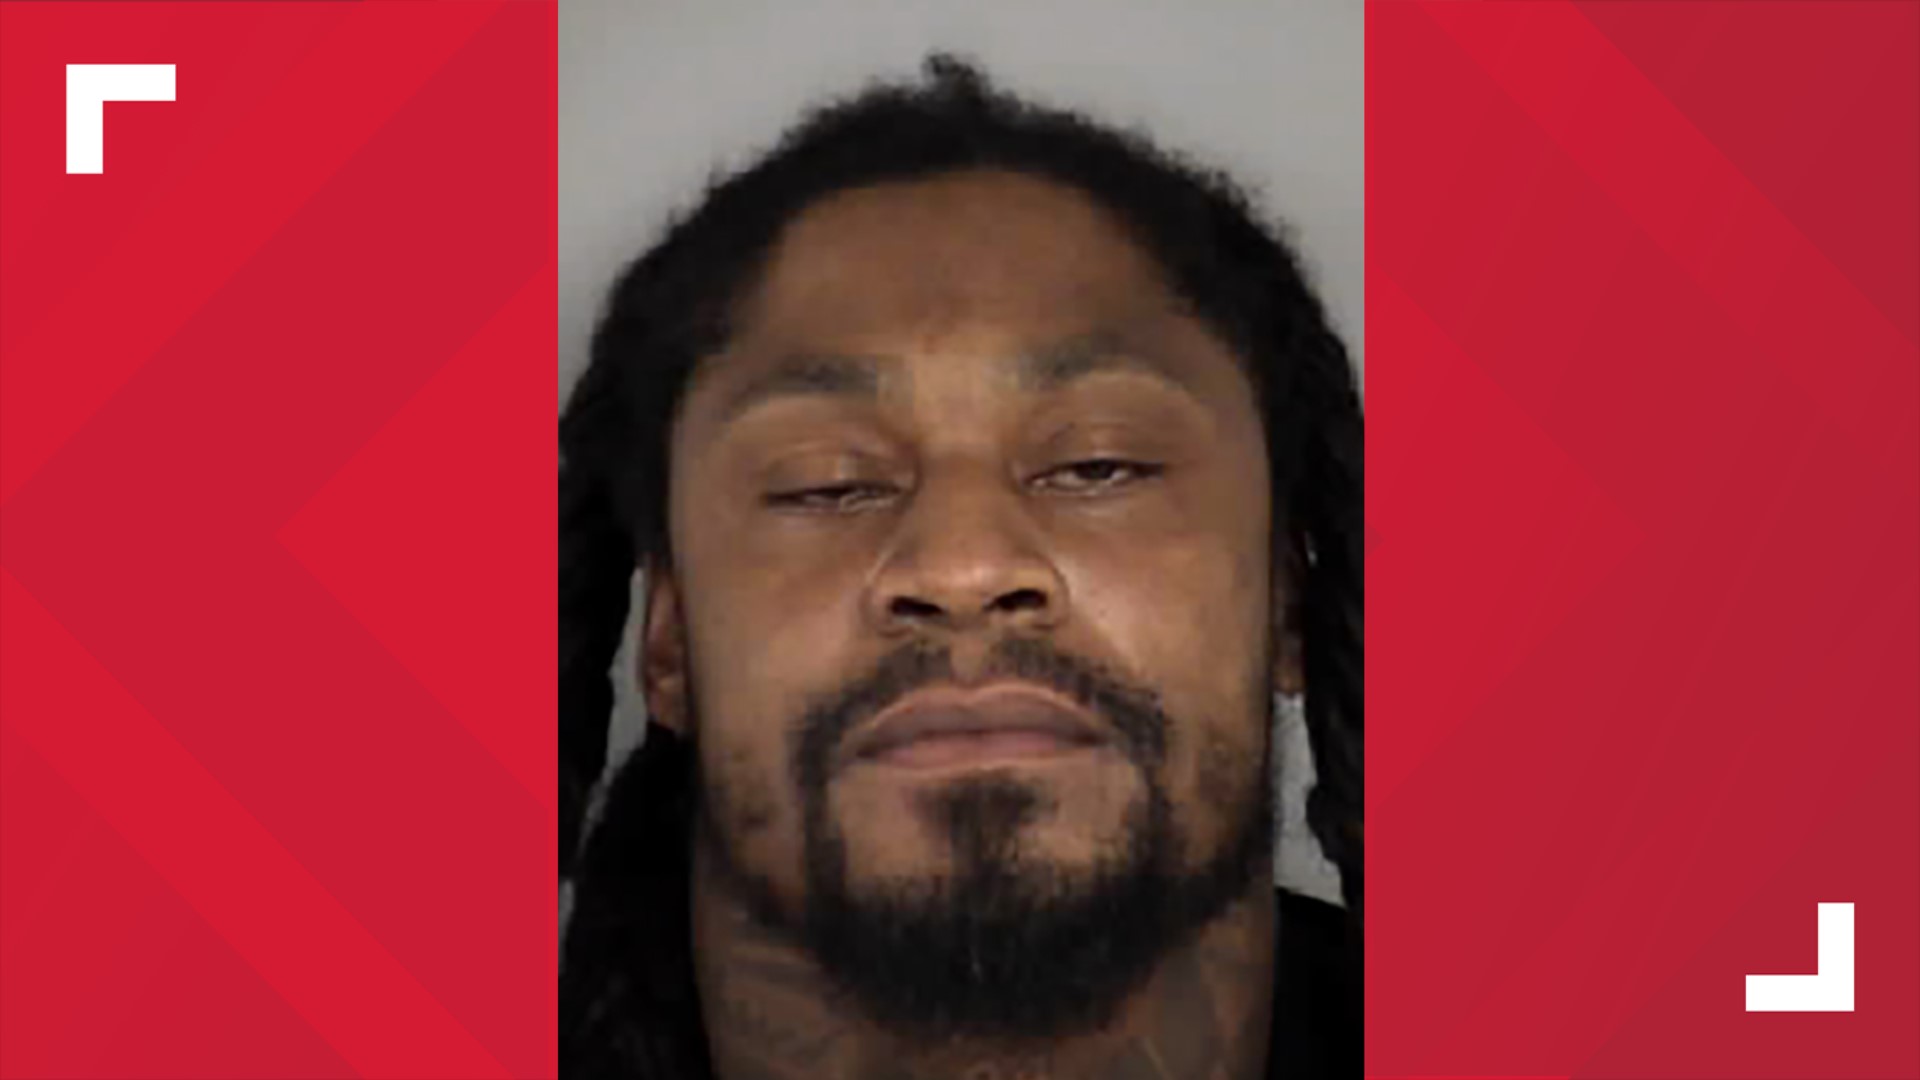 Former Seattle Seahawks running back Marshawn Lynch was arrested for allegedly driving under the influence in Las Vegas on Tuesday.